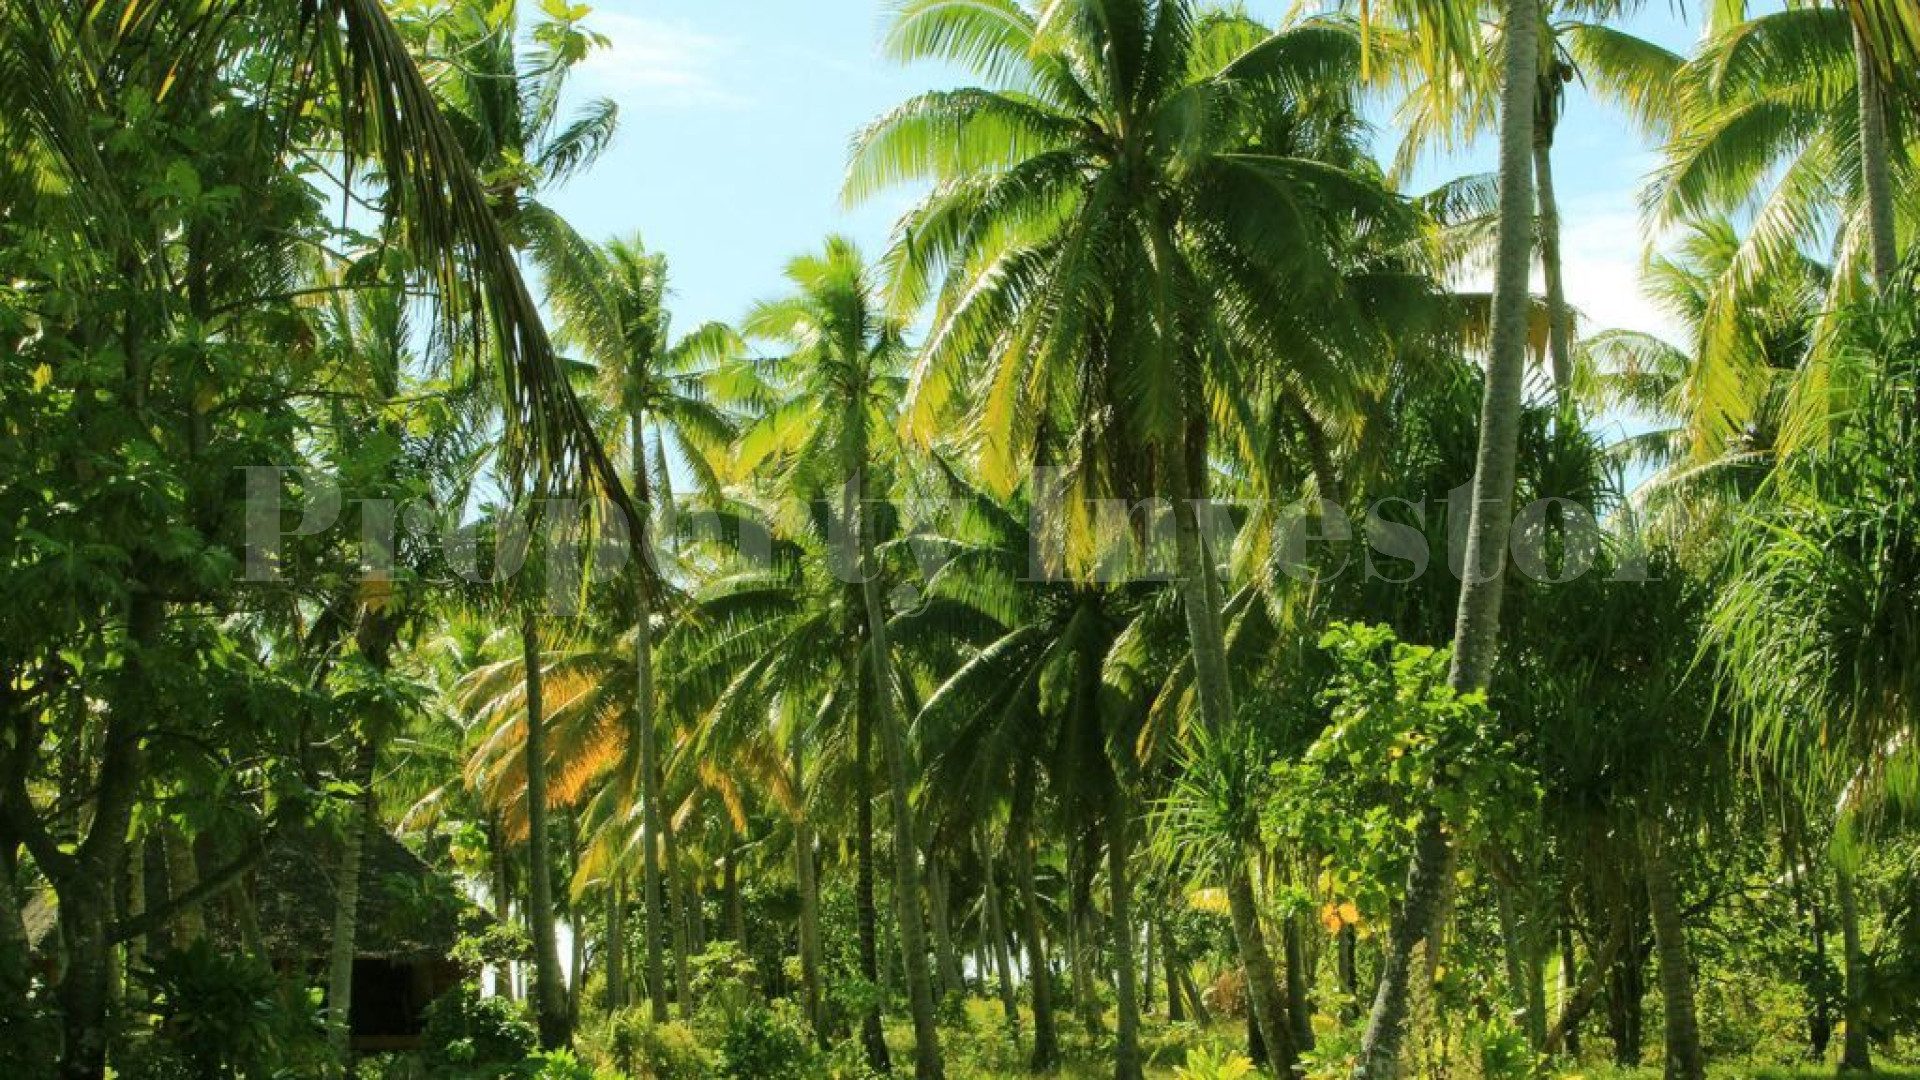 Picturesque 7.12 Hectare Private Virgin Island for Sale in Taha'a, French Polynesia